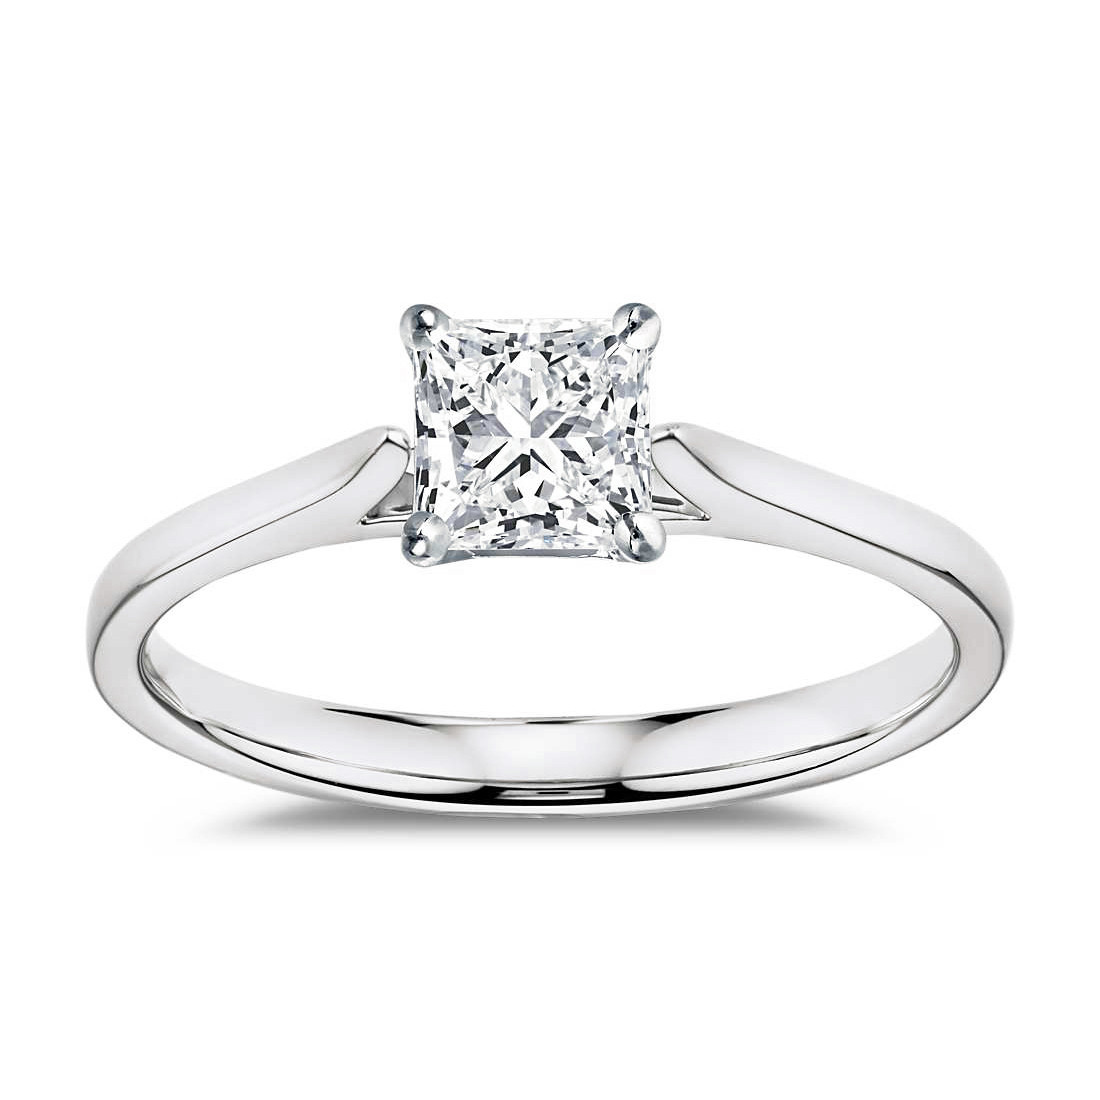 Princess Cut White Gold Engagement Ring
 14k White Gold Certified Princess Cut Diamond Solitaire